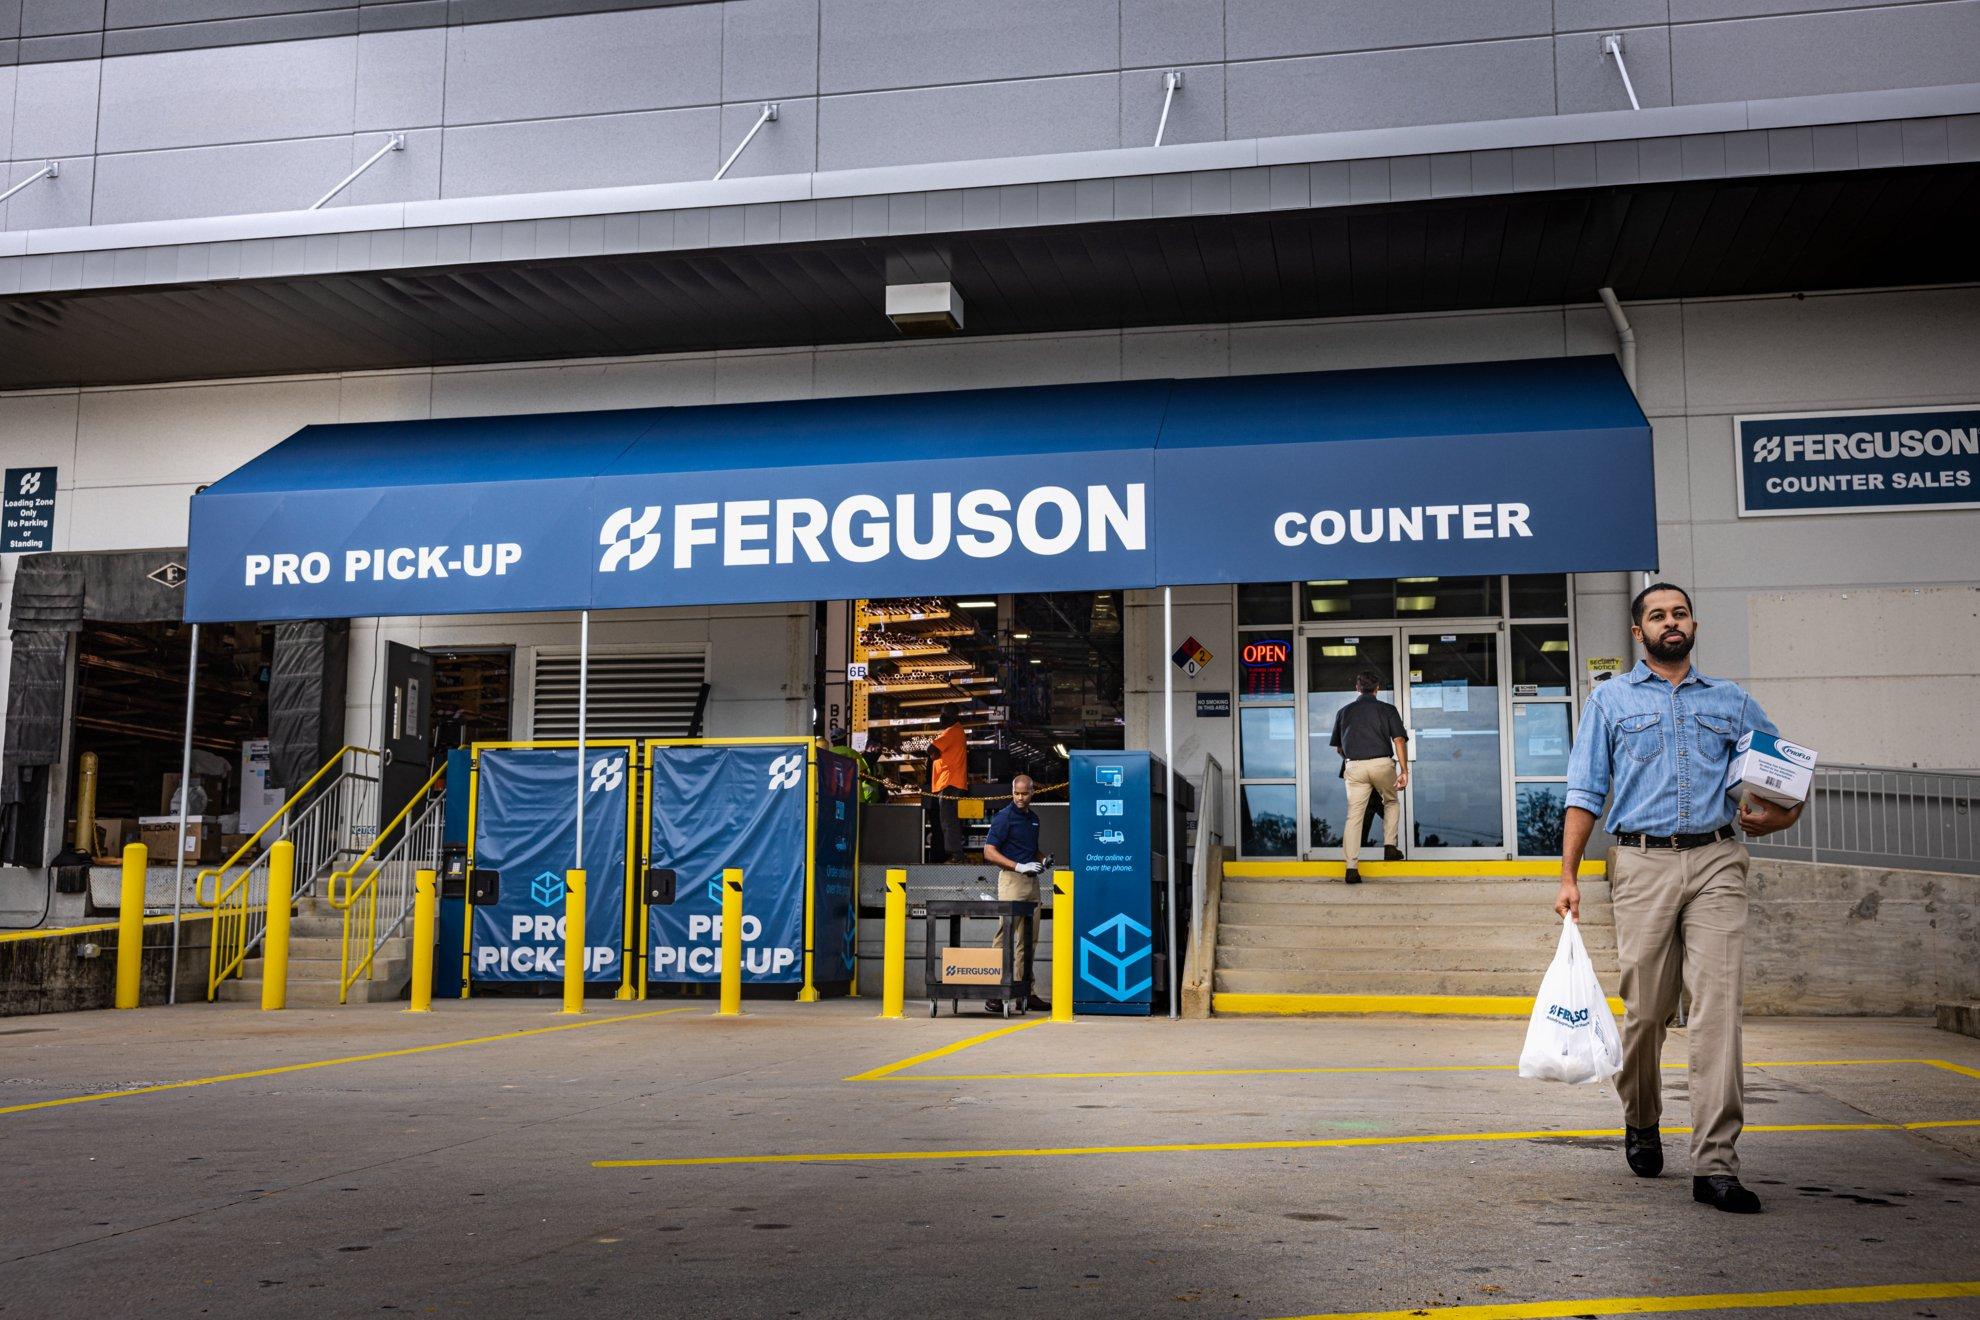 A customer carries bags out of a Ferguson Counter location.